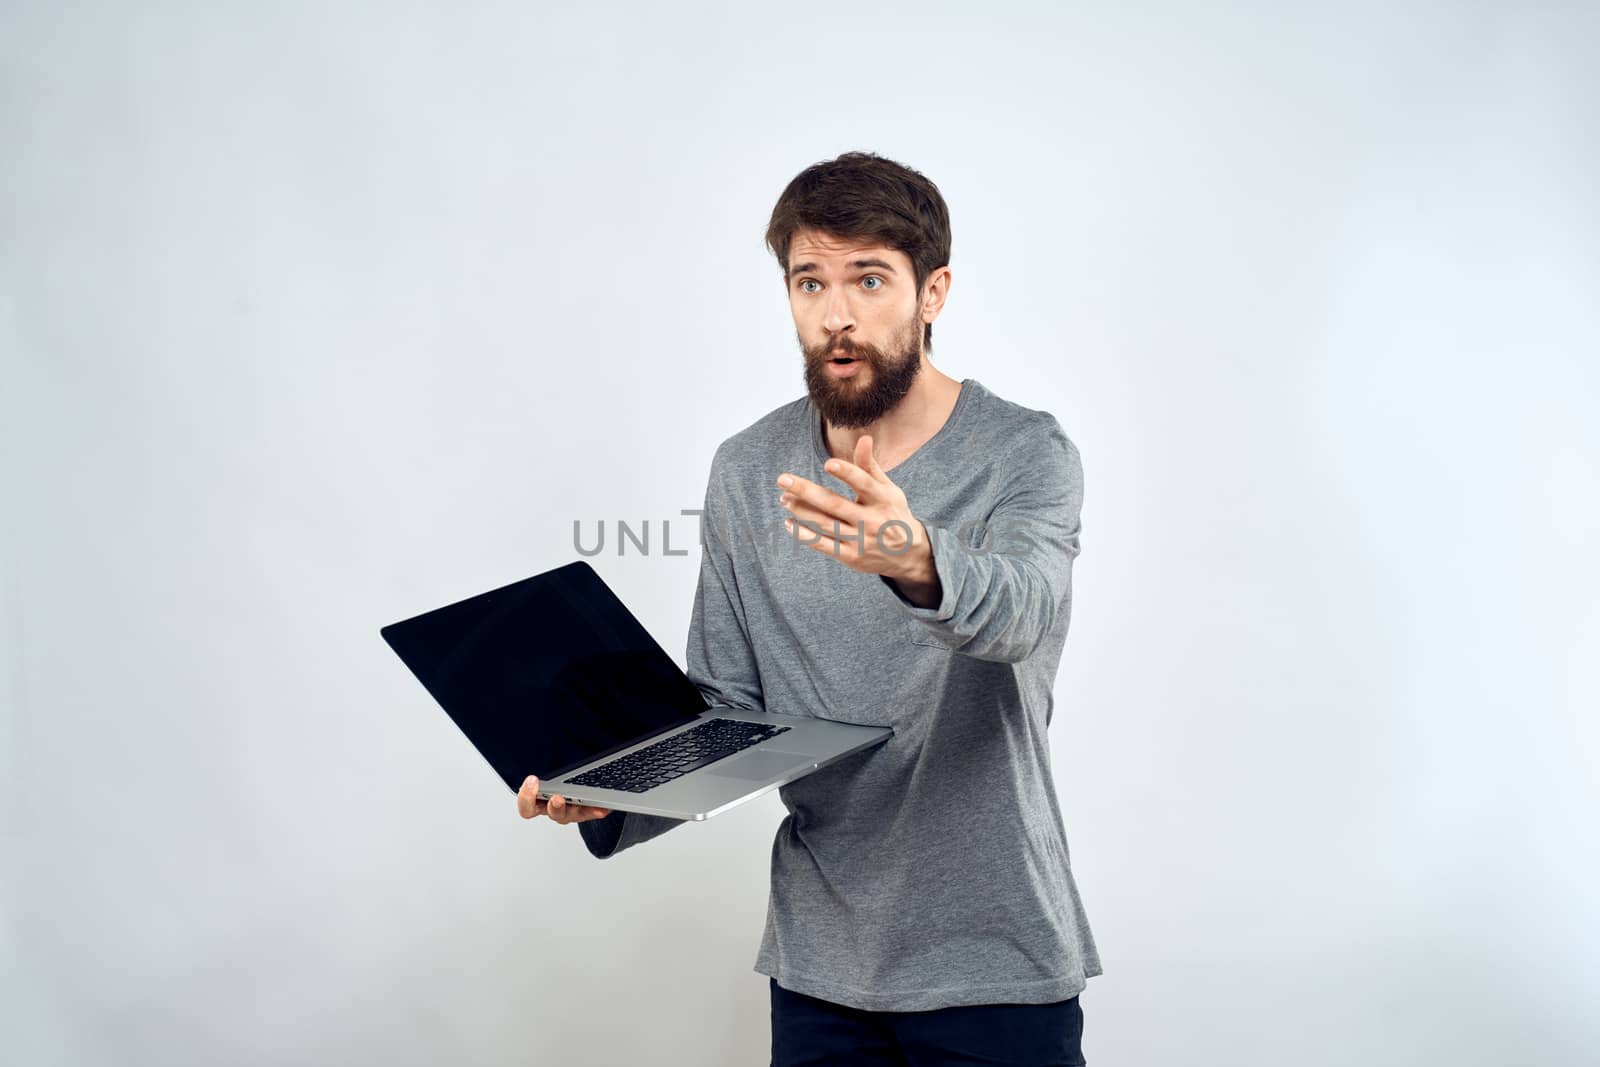 A man in a gray sweater with a laptop hands lifestyle technology communication internet work by SHOTPRIME